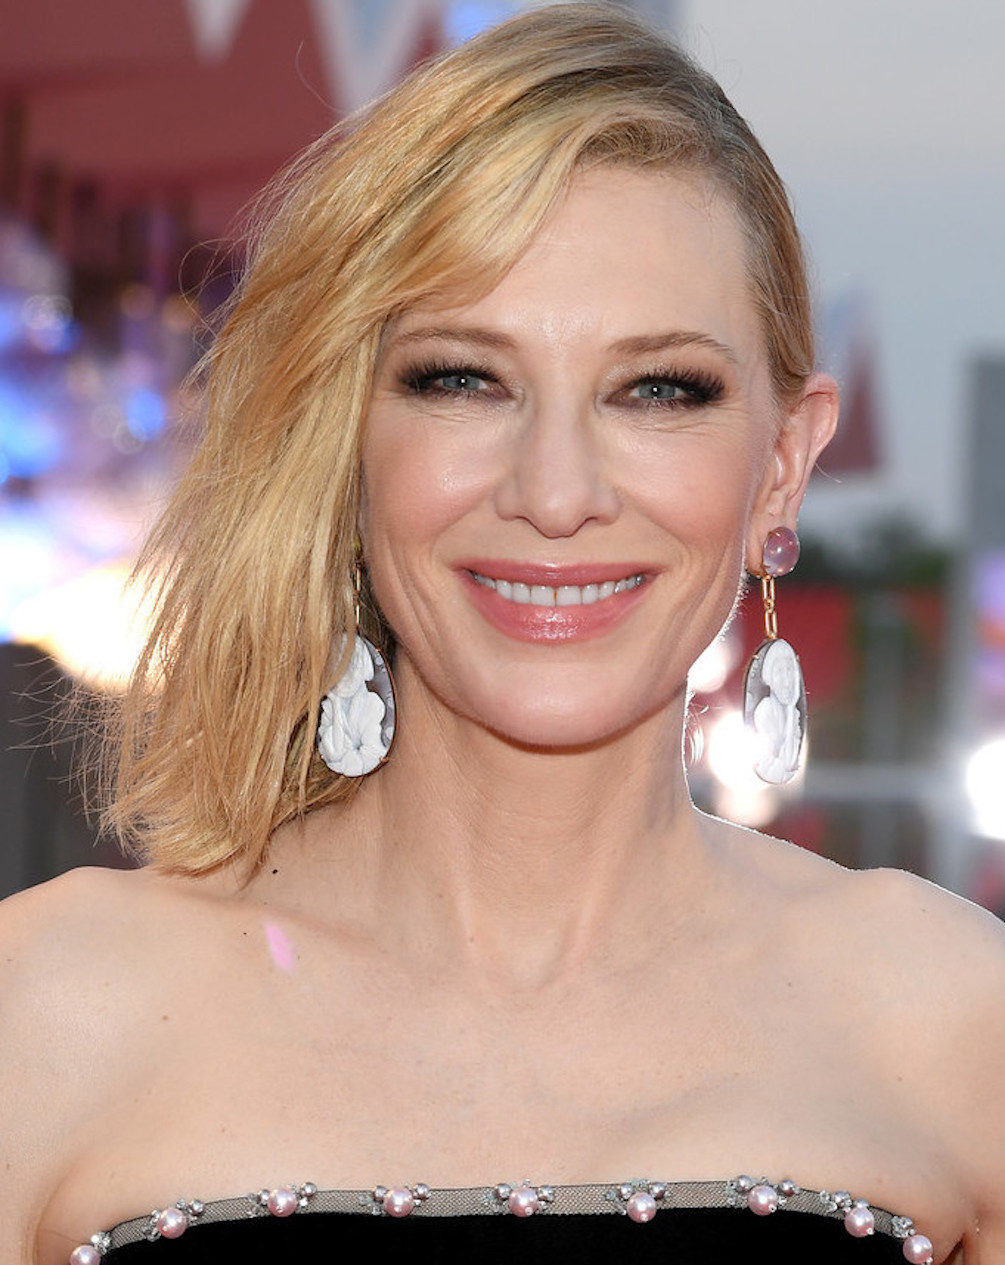 Out of the Archives: Cate Blanchett on Playing Katharine Hepburn